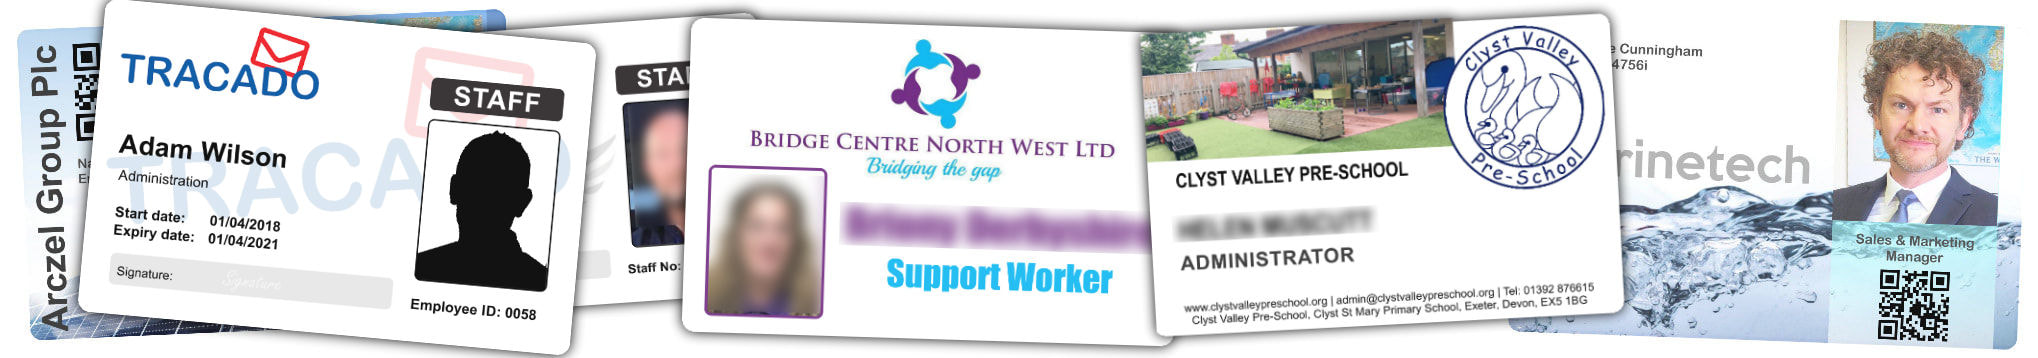 Cheltenham examples of staff photo ID cards | samples of employee Identity card printing | Workers ID cards printed in 